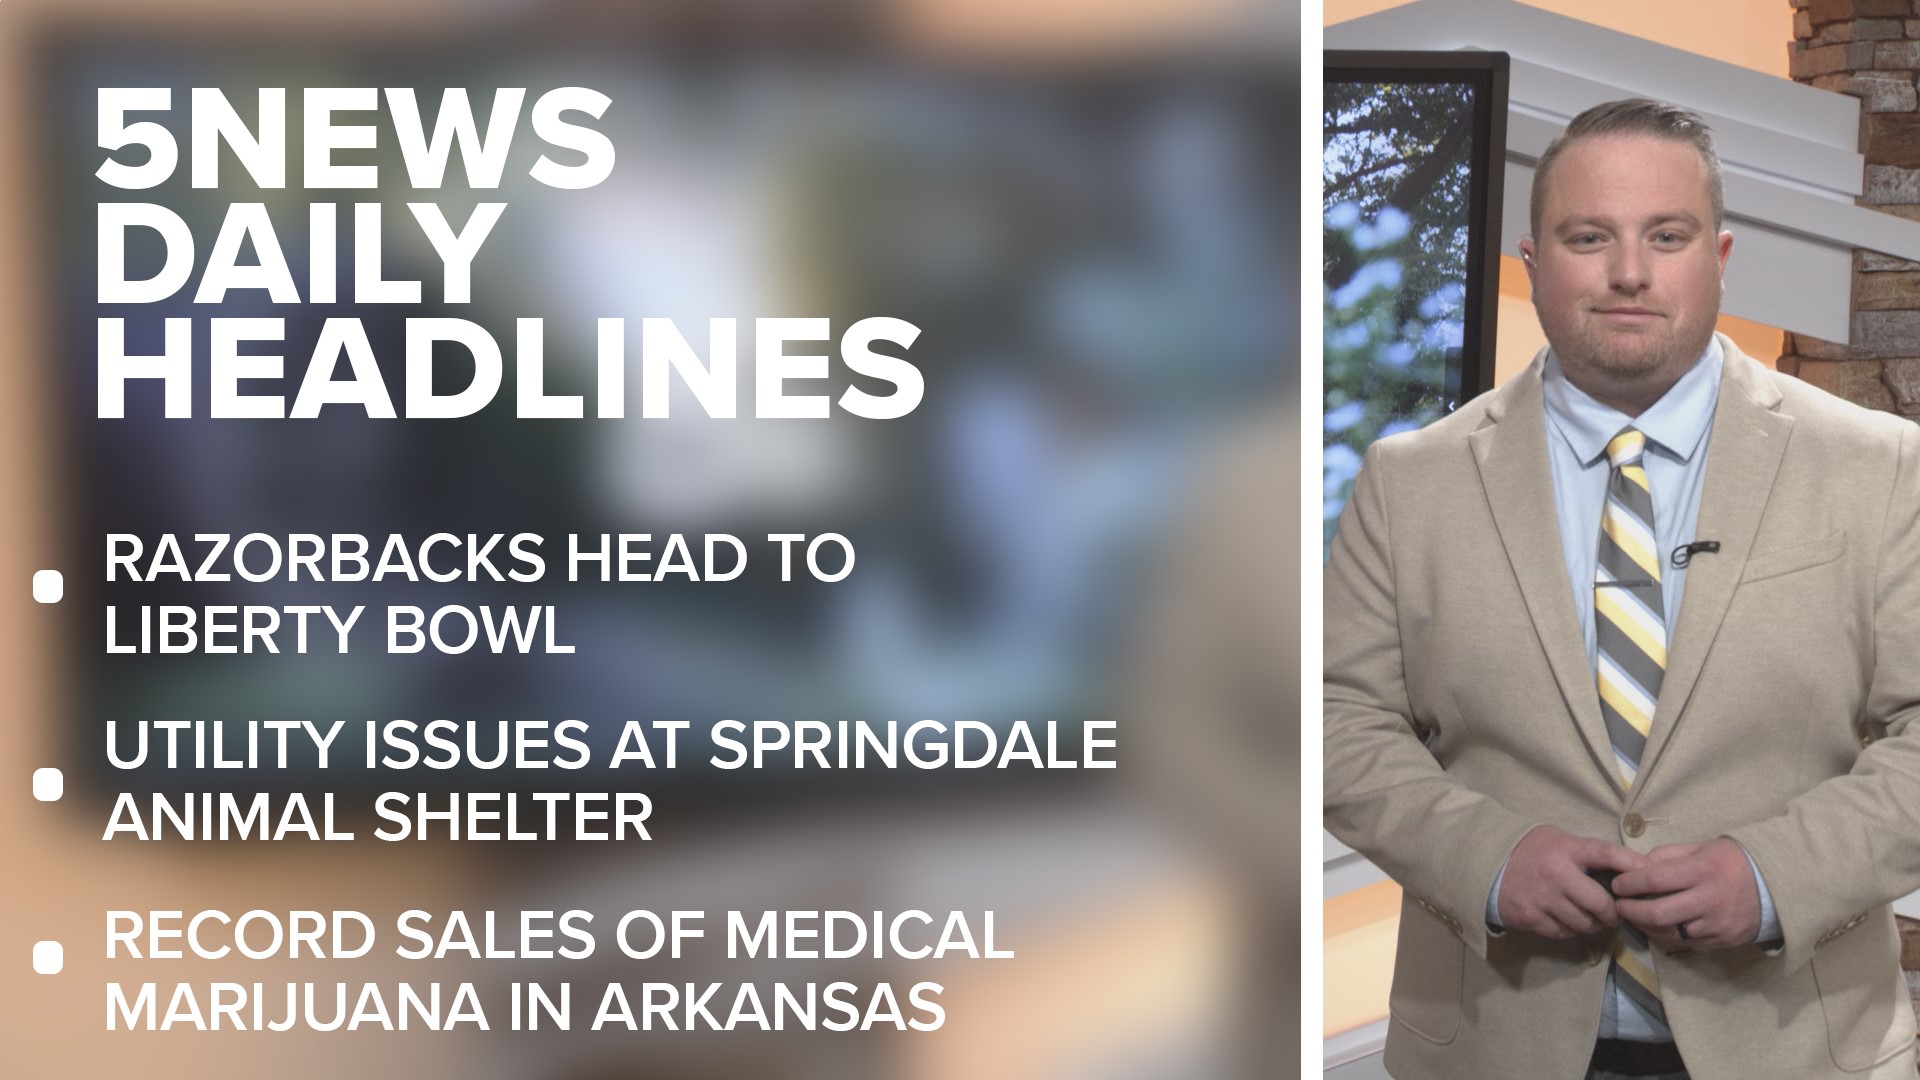 Daily headlines for local news across Northwest Arkansas and the River Valley for Dec. 27, 2022.